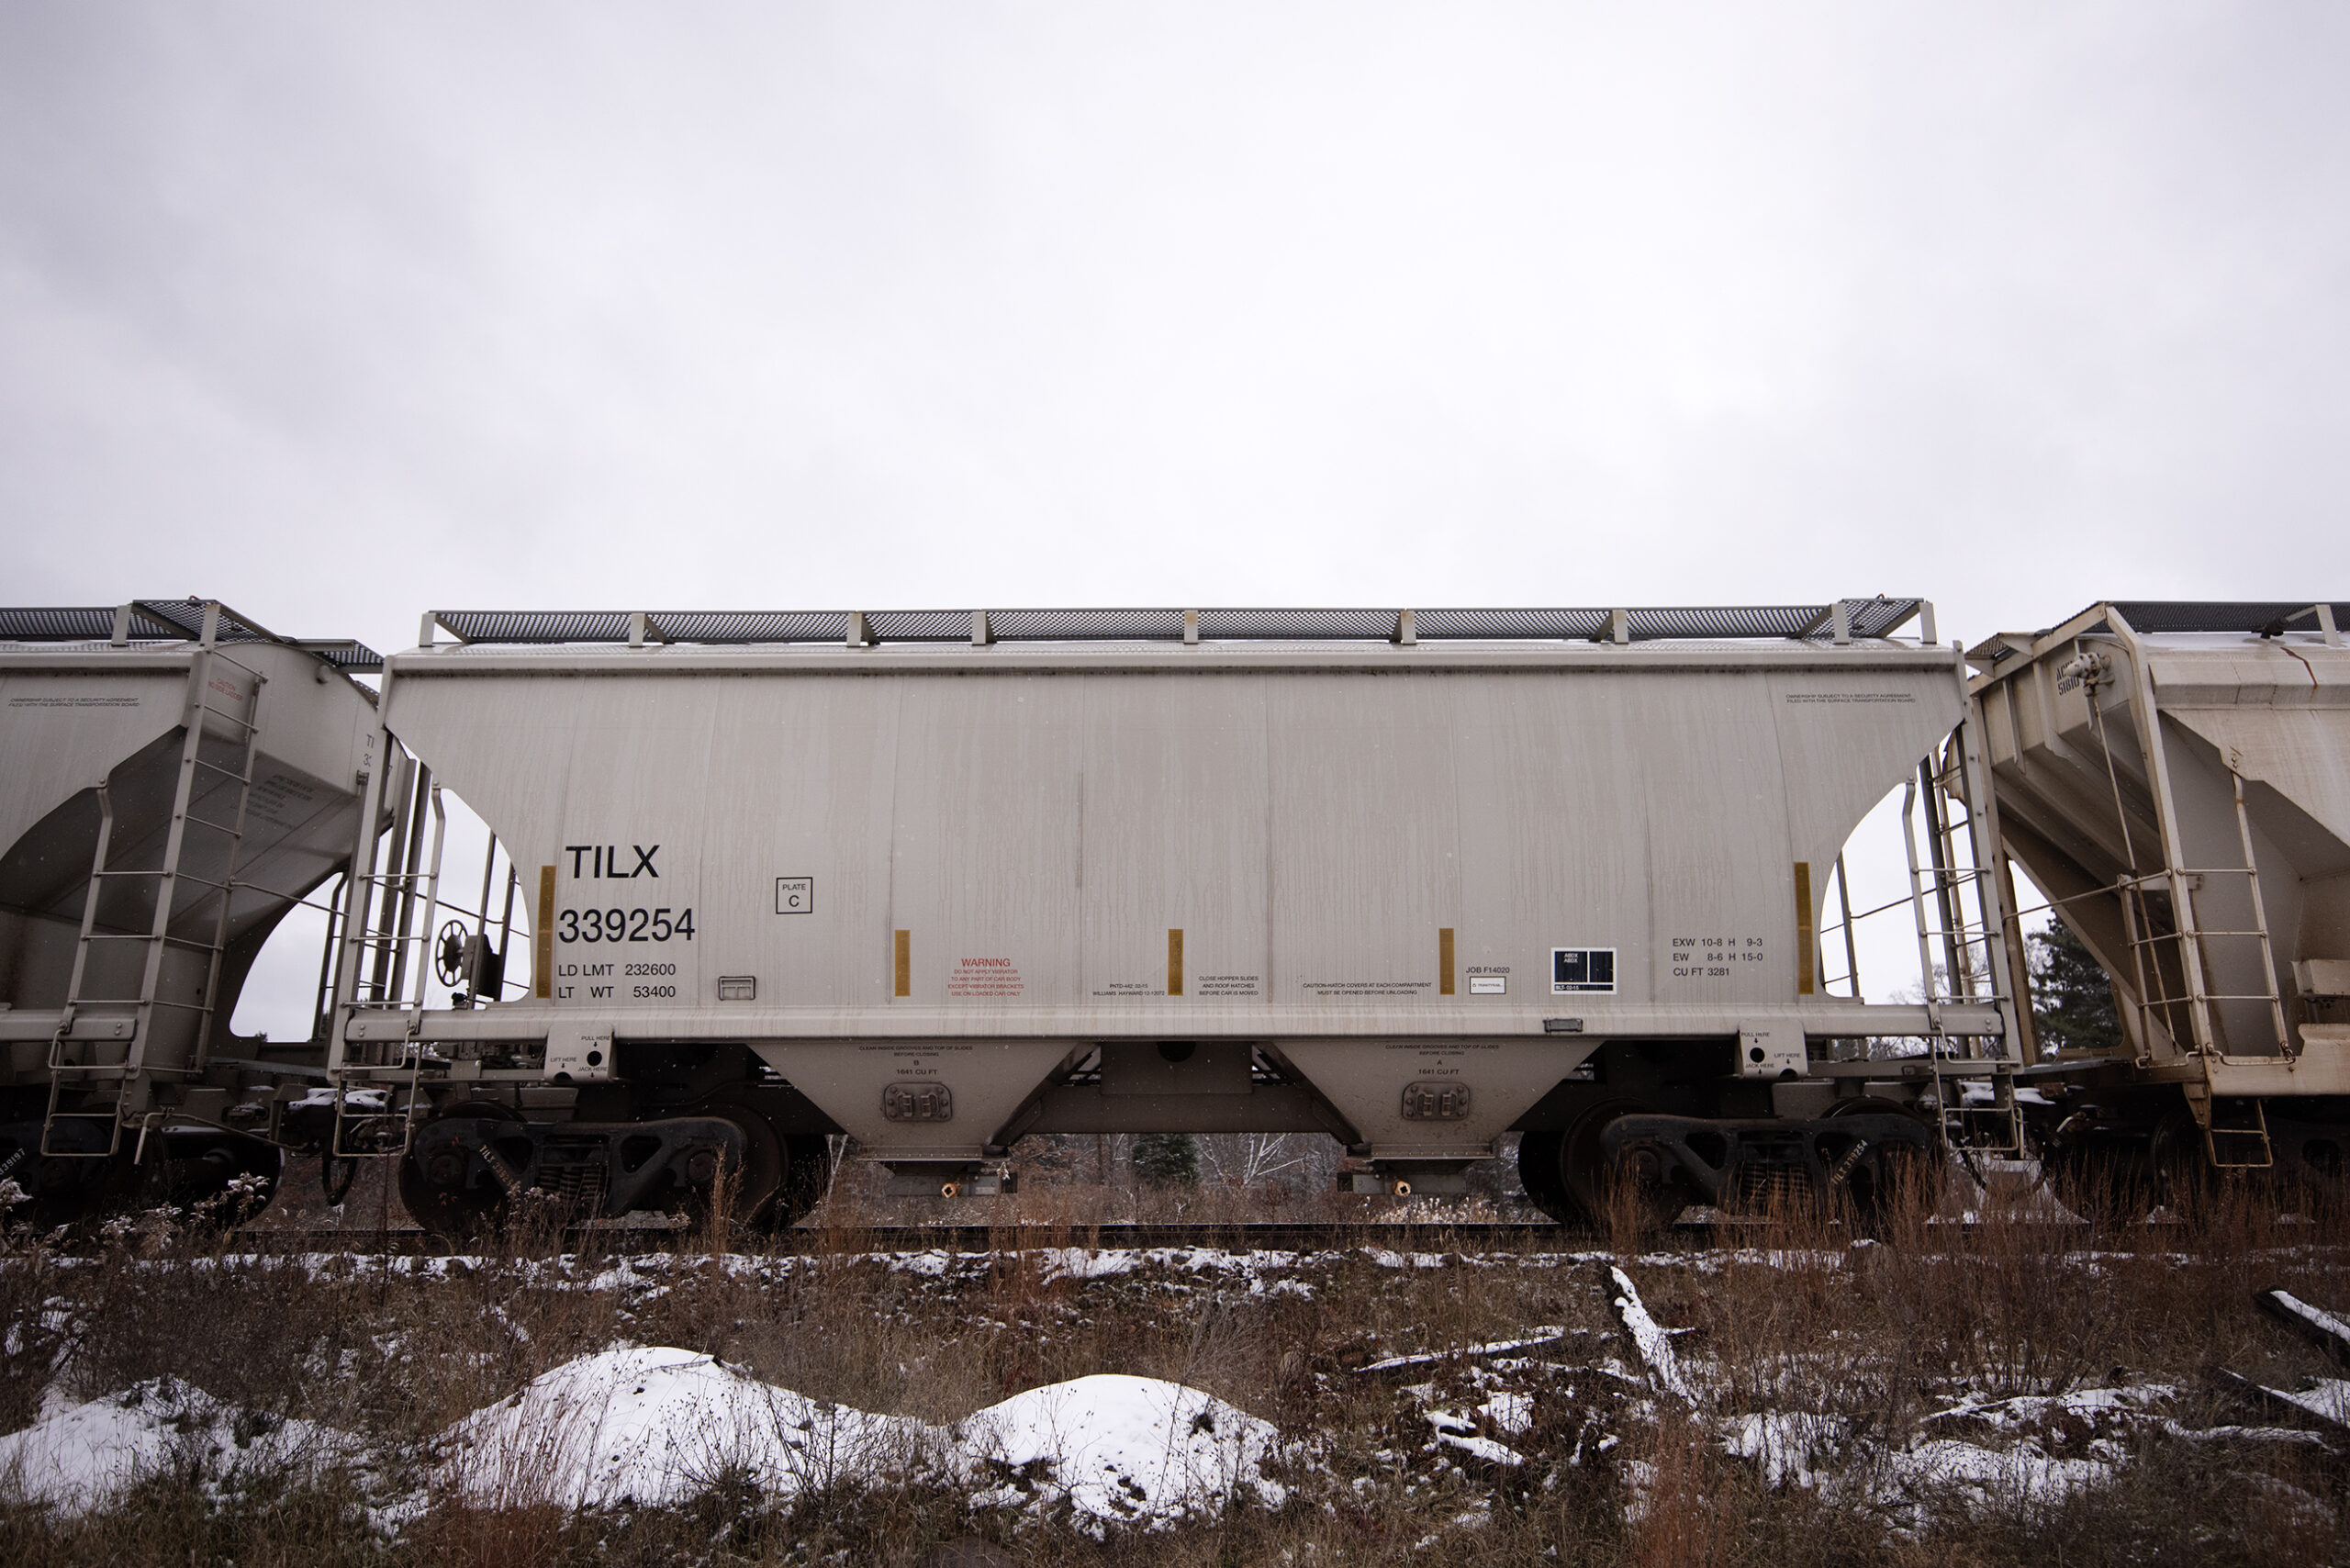 Gray metal train cars form a long line on a winter day.